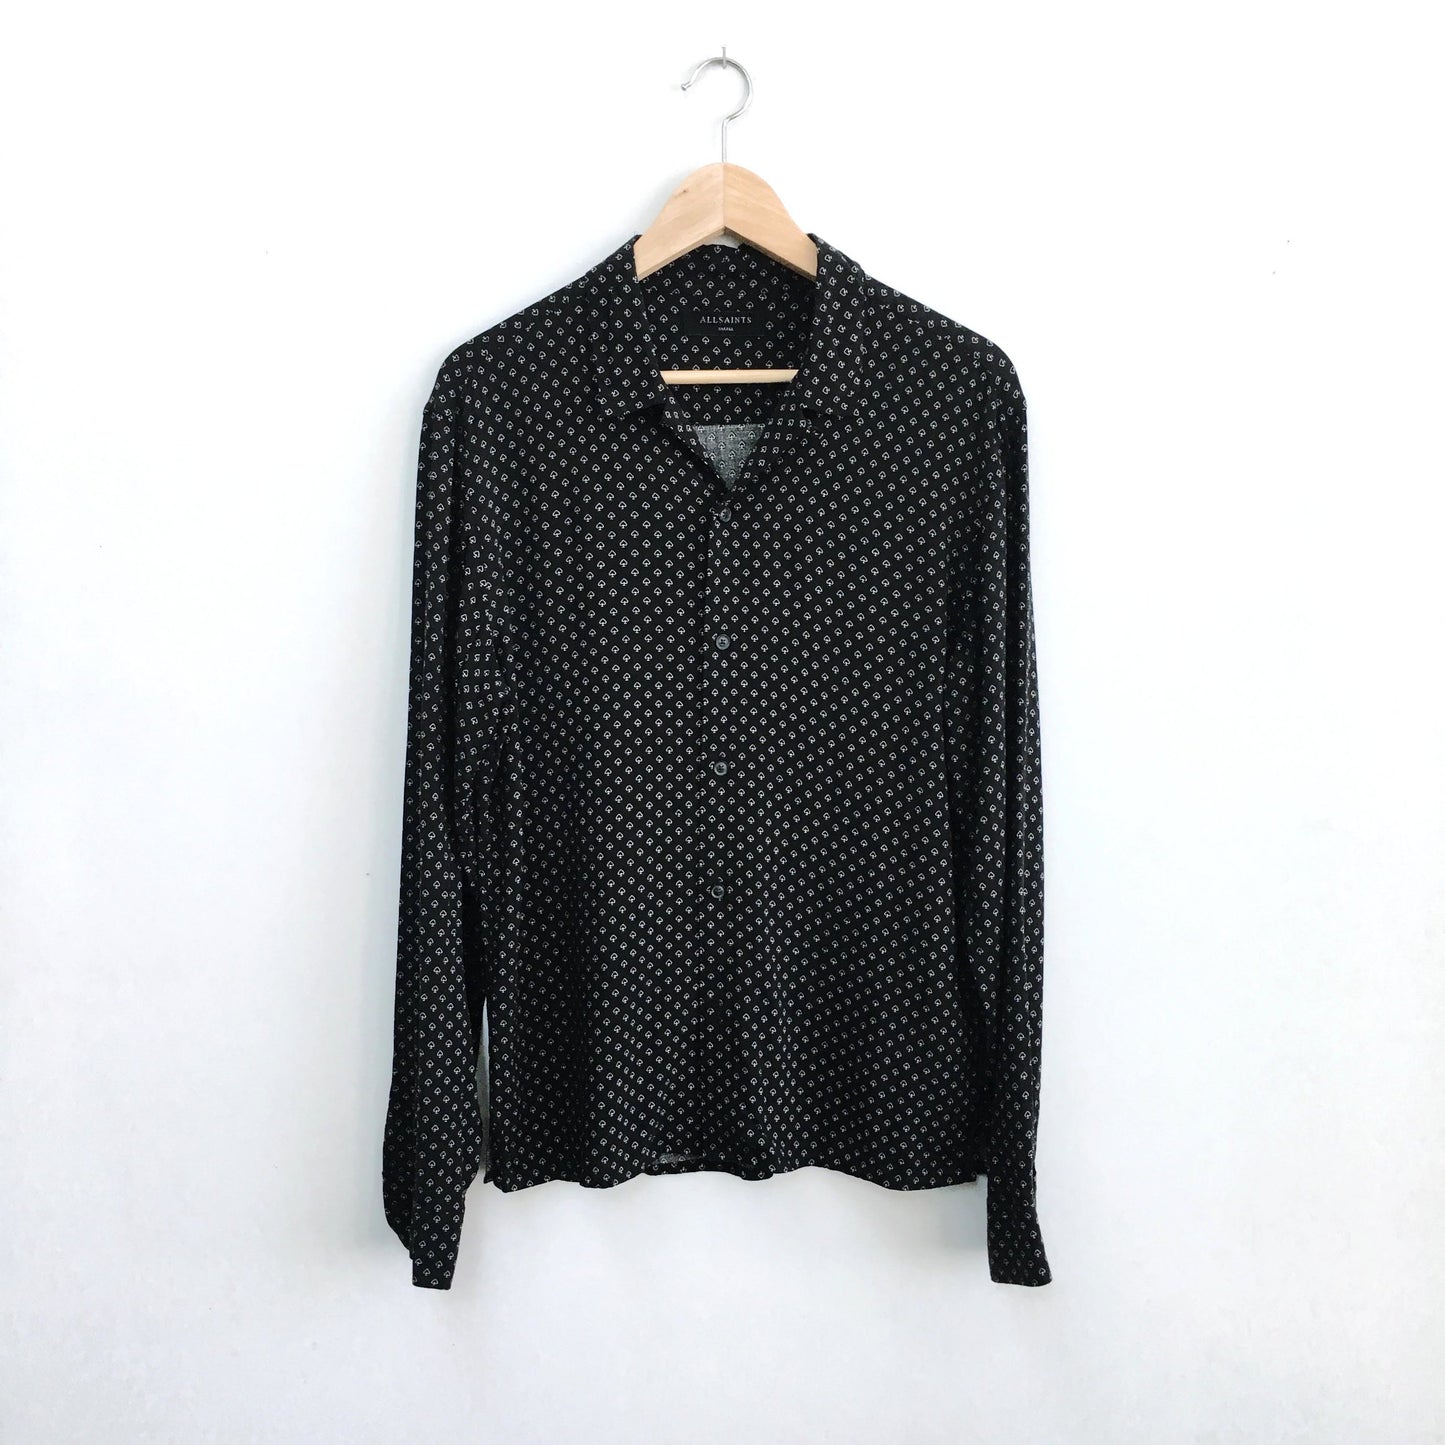 All Saints Spadille button up shirt - size Small